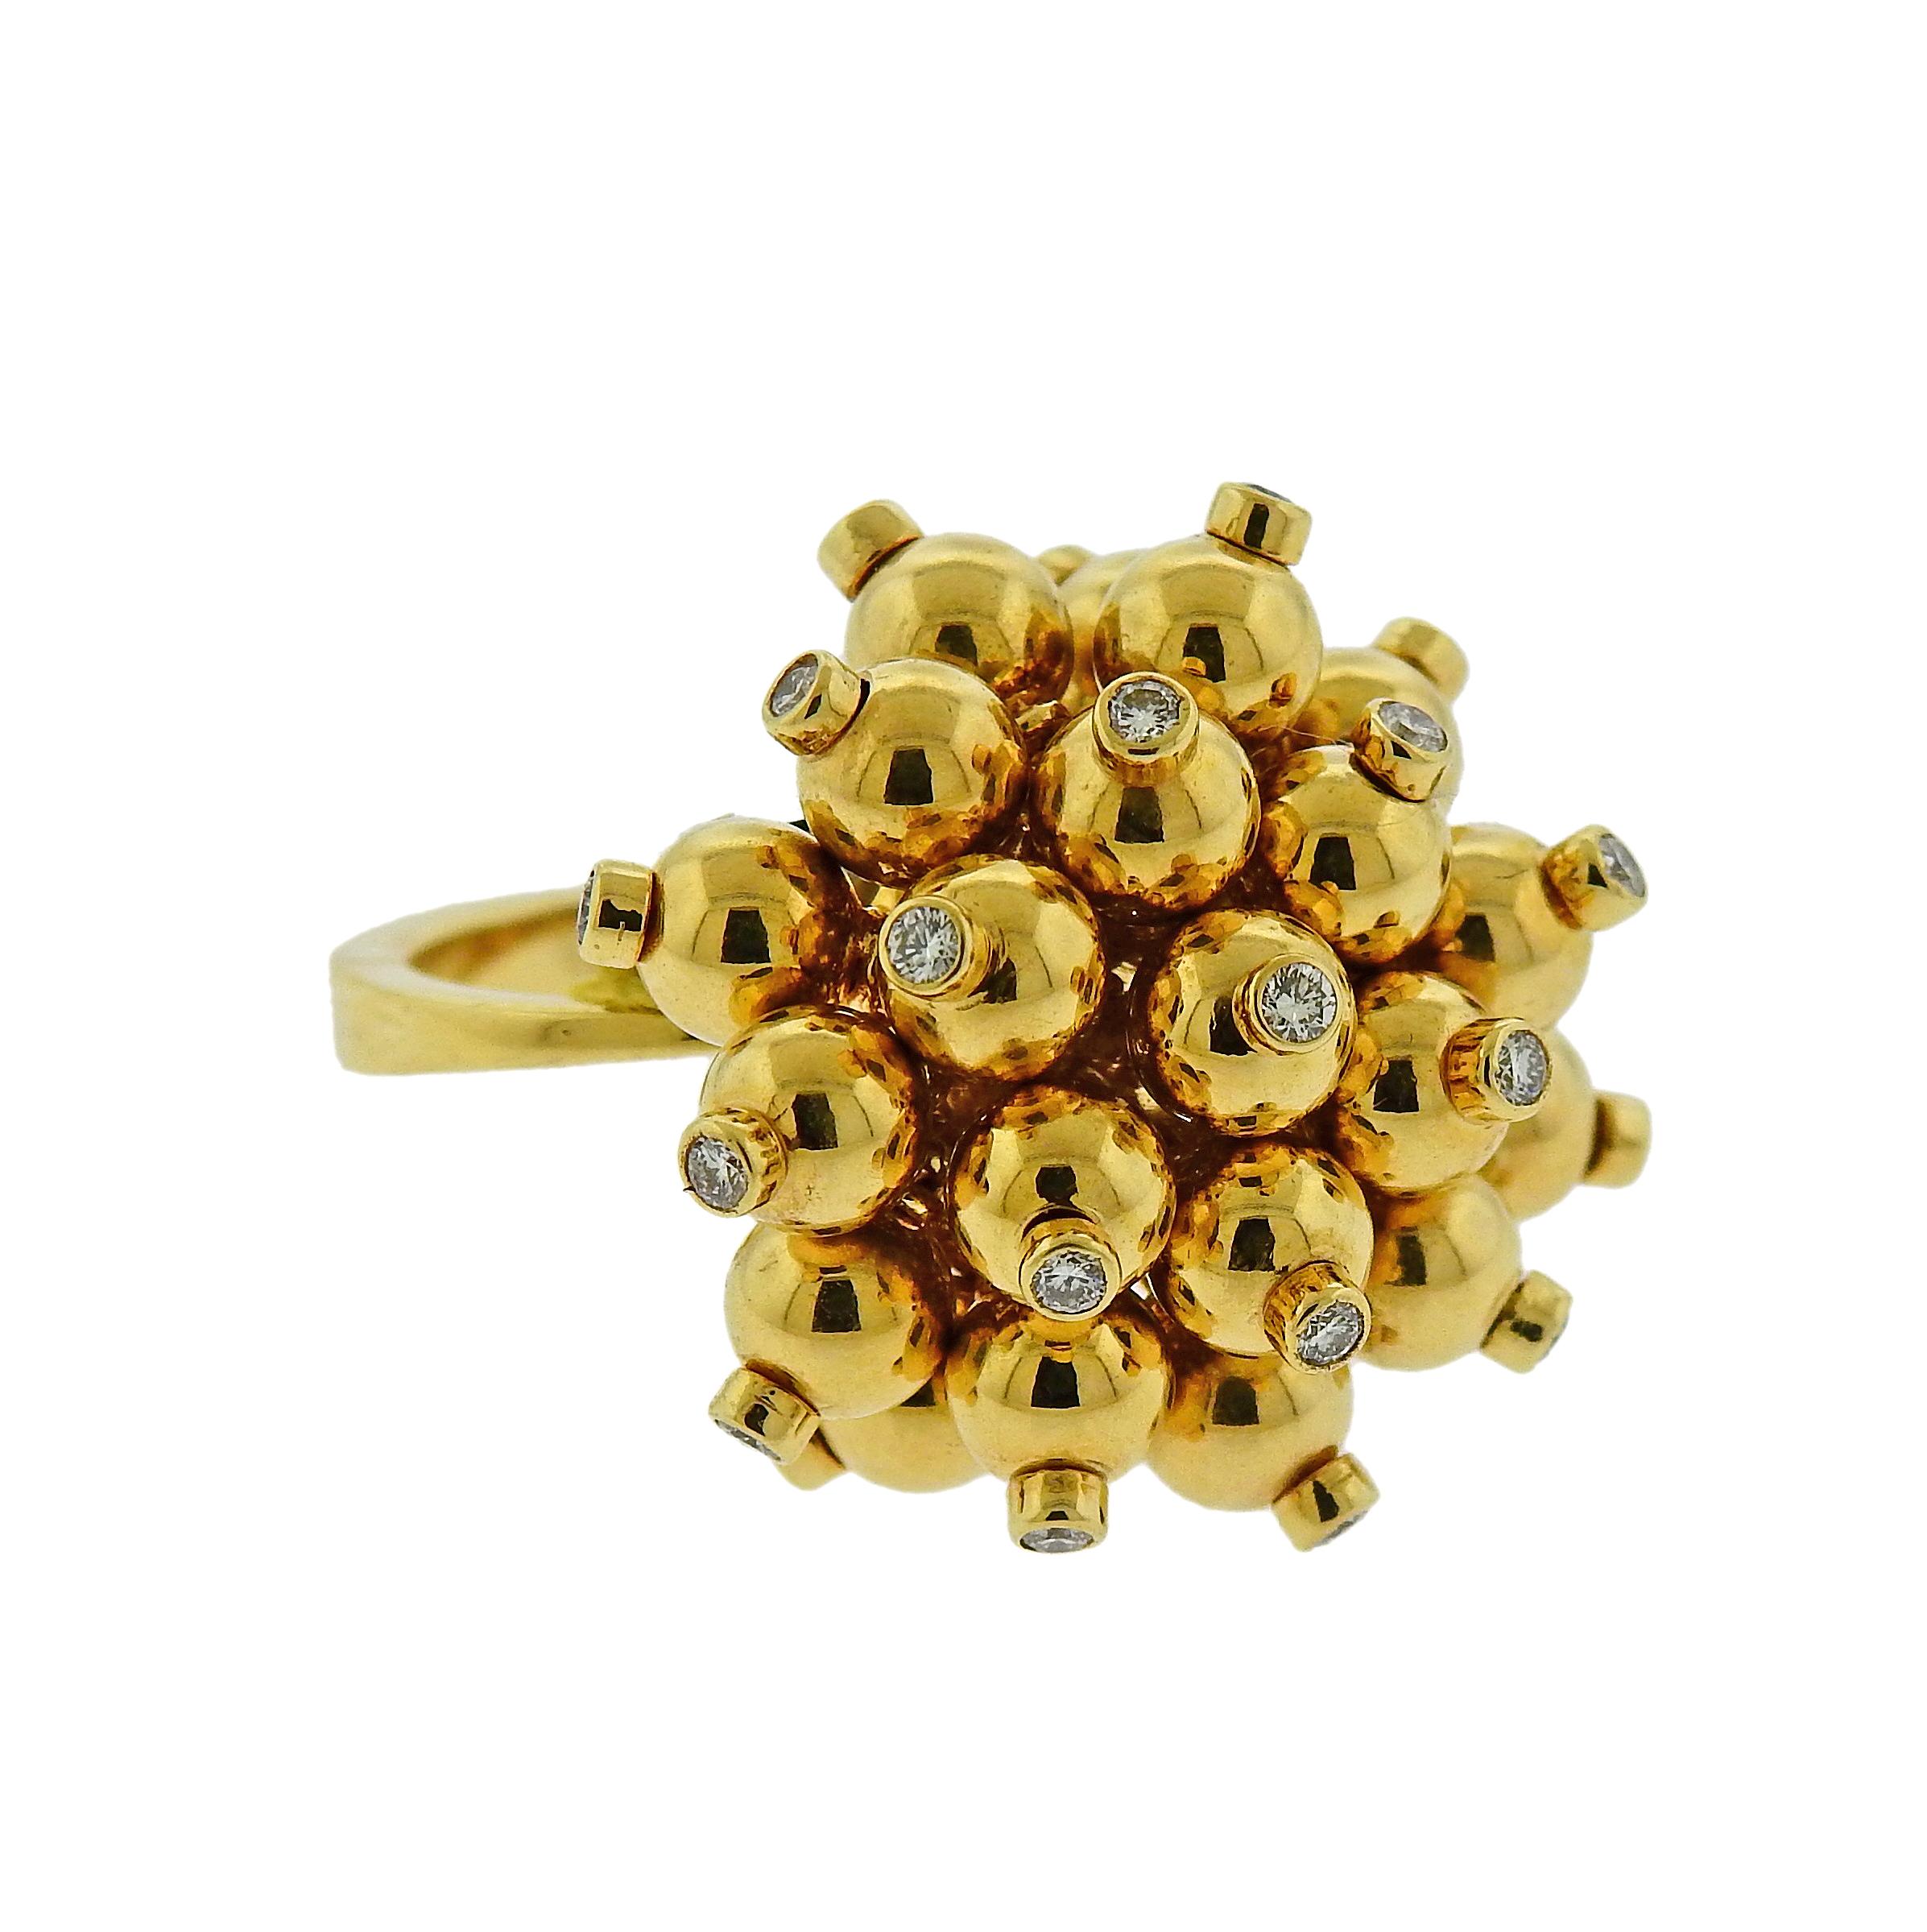 New 18k yellow gold pom pom charm ring by Aletto Brothers, set with 0.46ctw in VVS-VS/G diamonds. Ring size - 5.25, ring top is approx. 24mm in diameter.  Weighs 16.5 grams. Marked: 750, Ct.0.46, Aletto Bros.